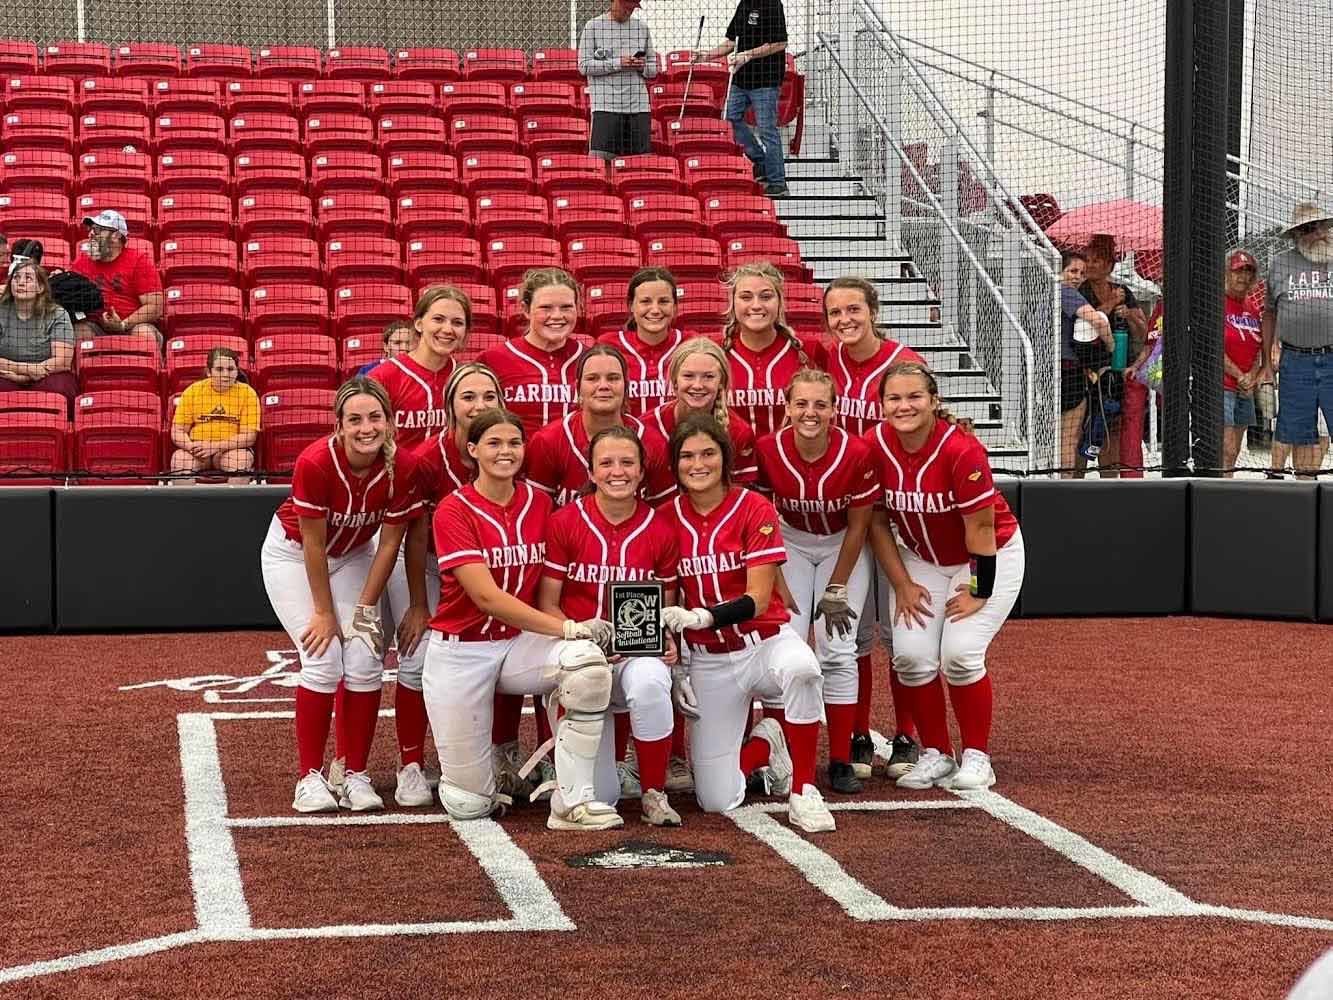 WE COULD GET USED TO THIS!  The Lady Cardinals show off their second tournament championship trophy of the 2022 season that they picked up in Warrensburg on Saturday.  Addison Markham sealed the deal with a walk-off homer, the program's first in a decade.